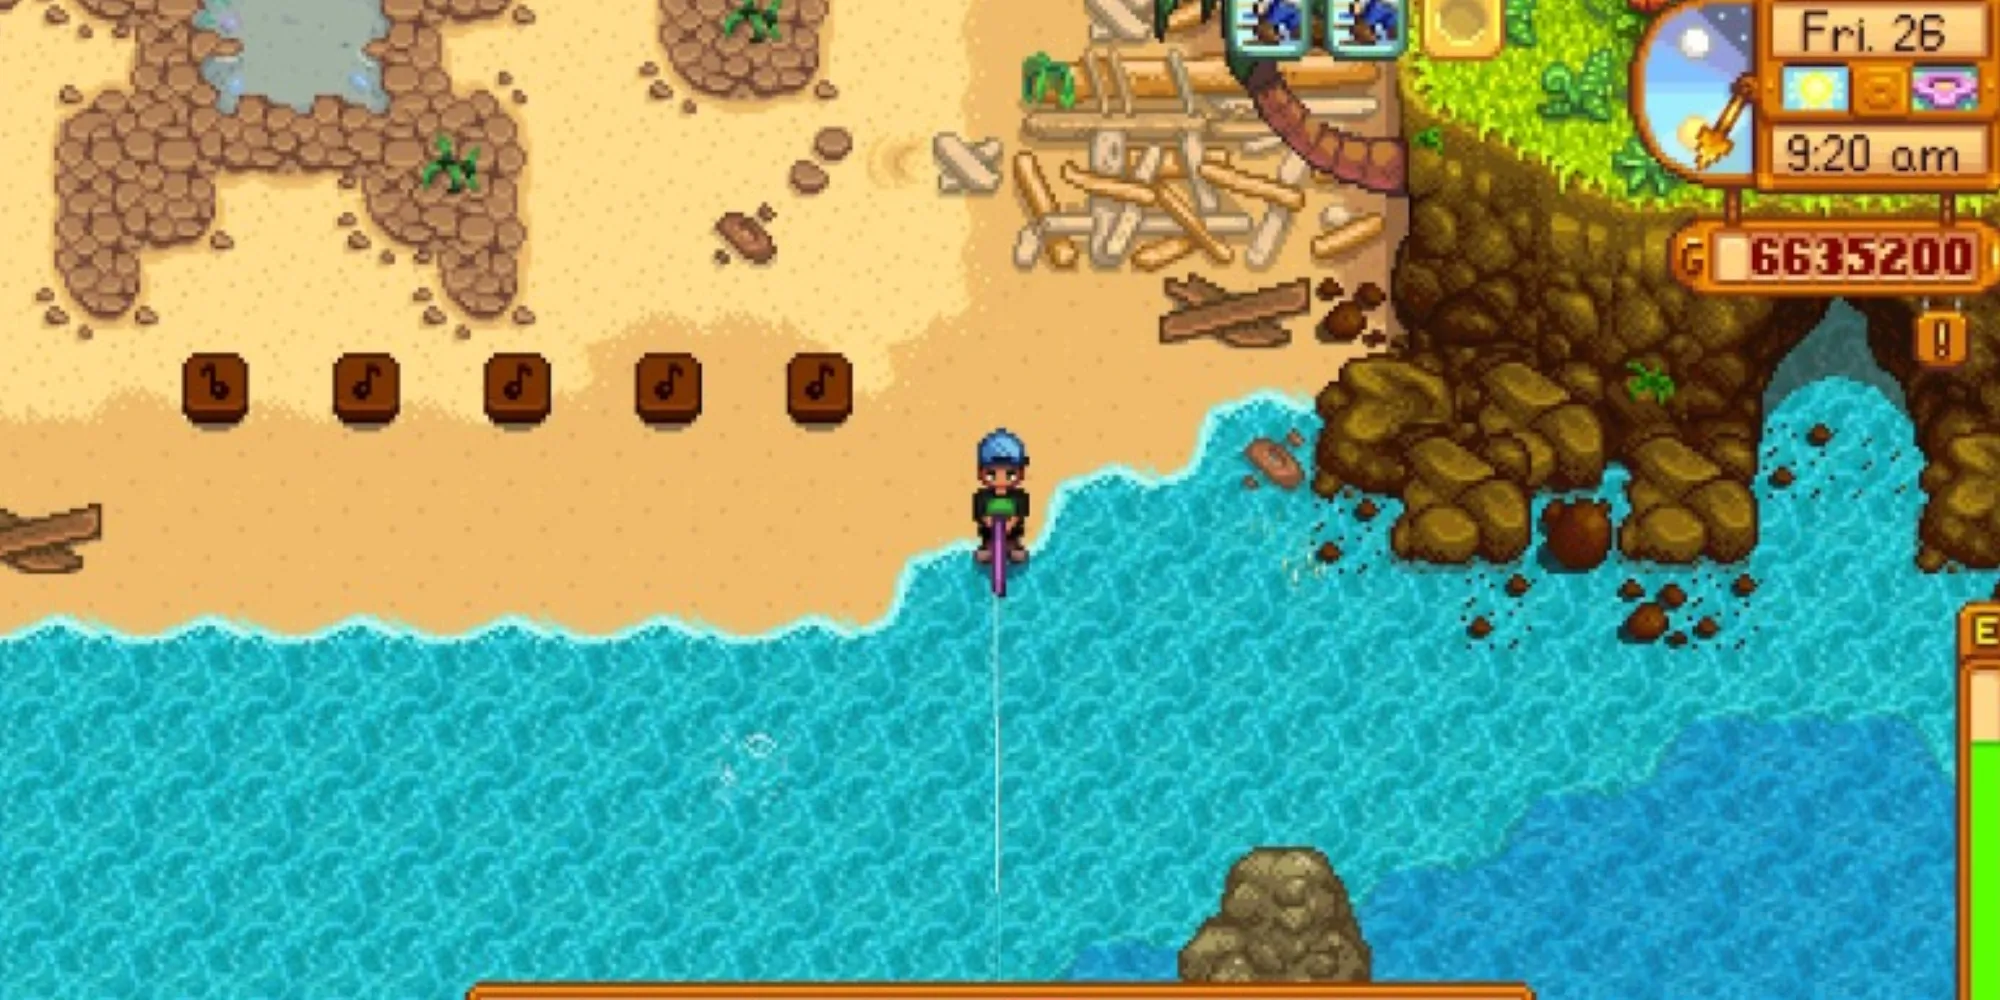 Ginger Island South Stardew Valley